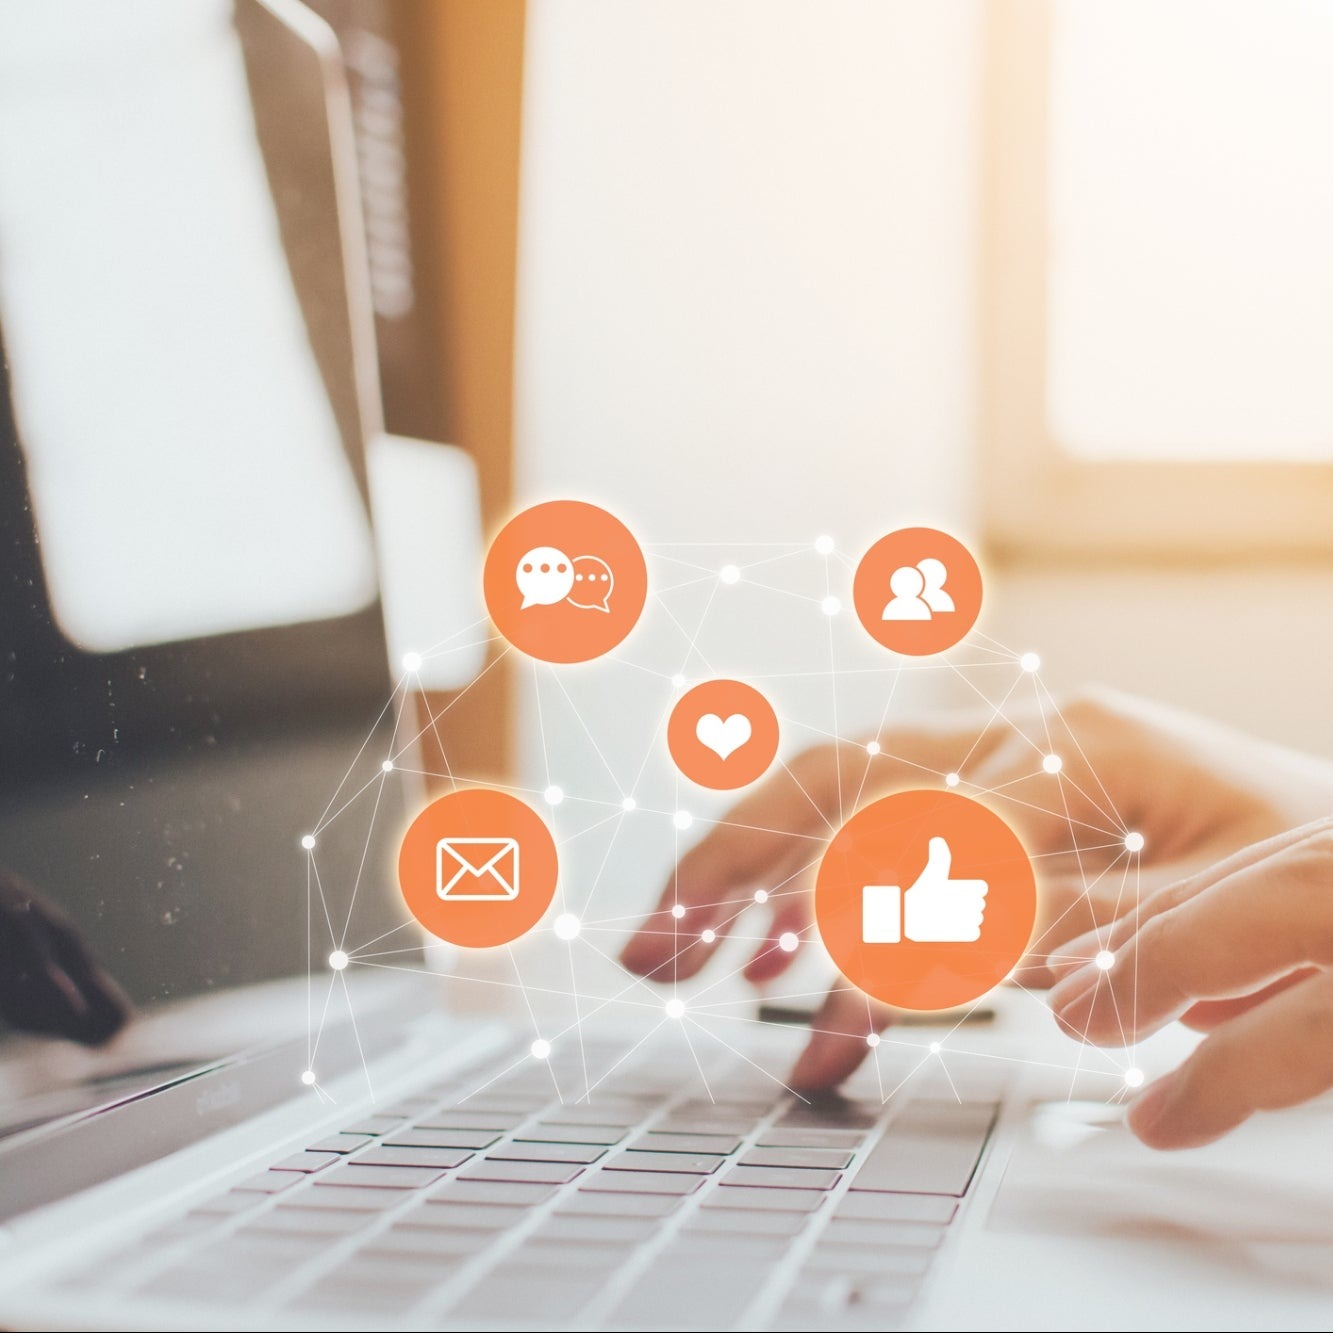 5 Digital Marketing Trends For Your Business In 2021